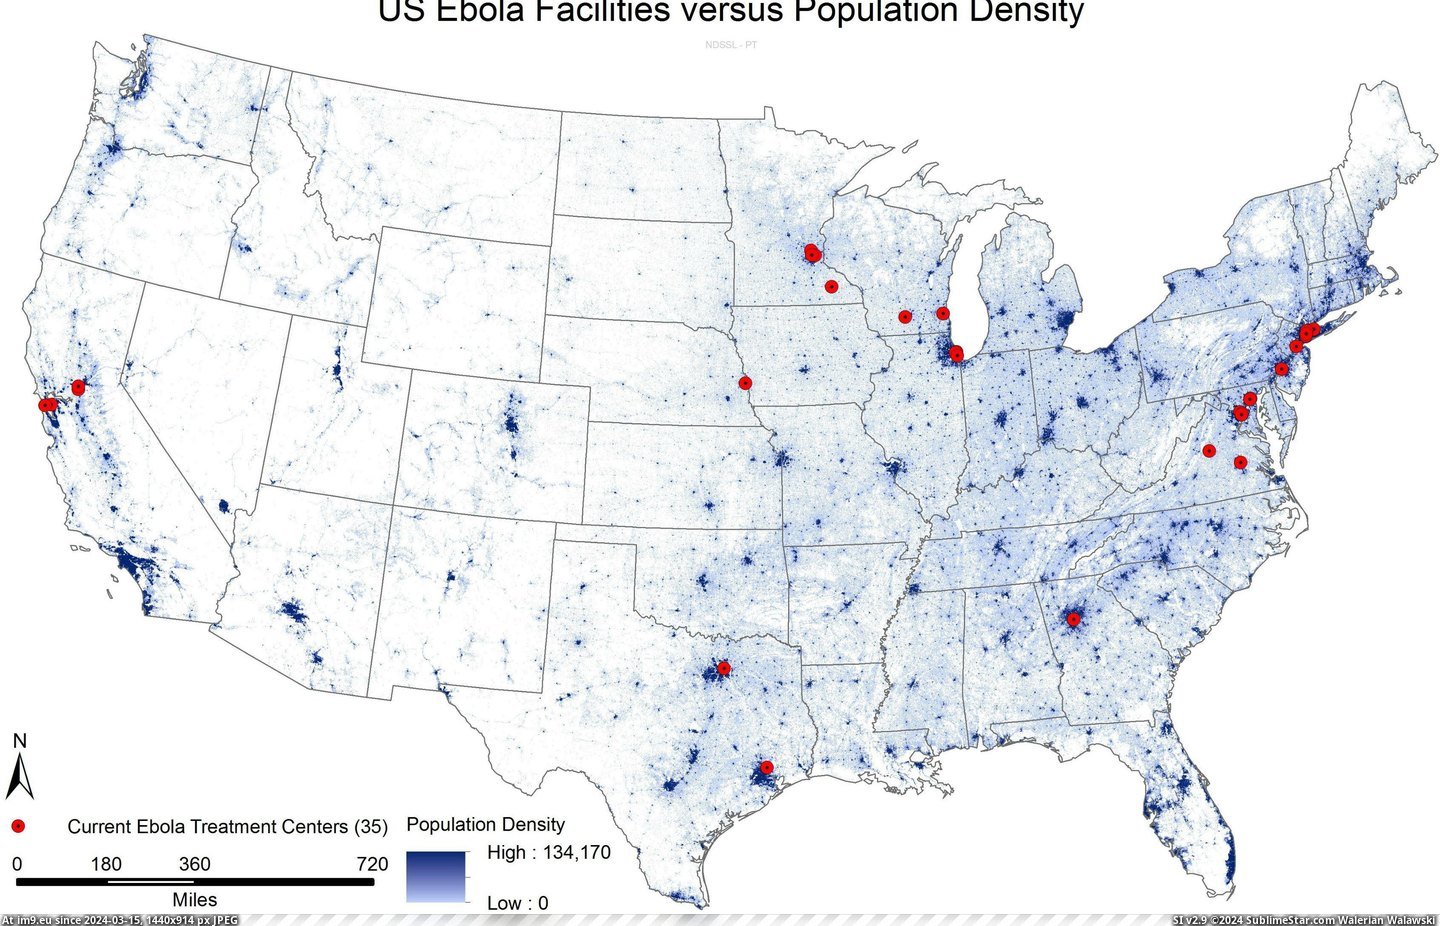 #Population #Density #Centers #Ebola #Treatment [Mapporn] US Ebola Treatment Centers plus Population Density [3760 x 2402] Pic. (Image of album My r/MAPS favs))